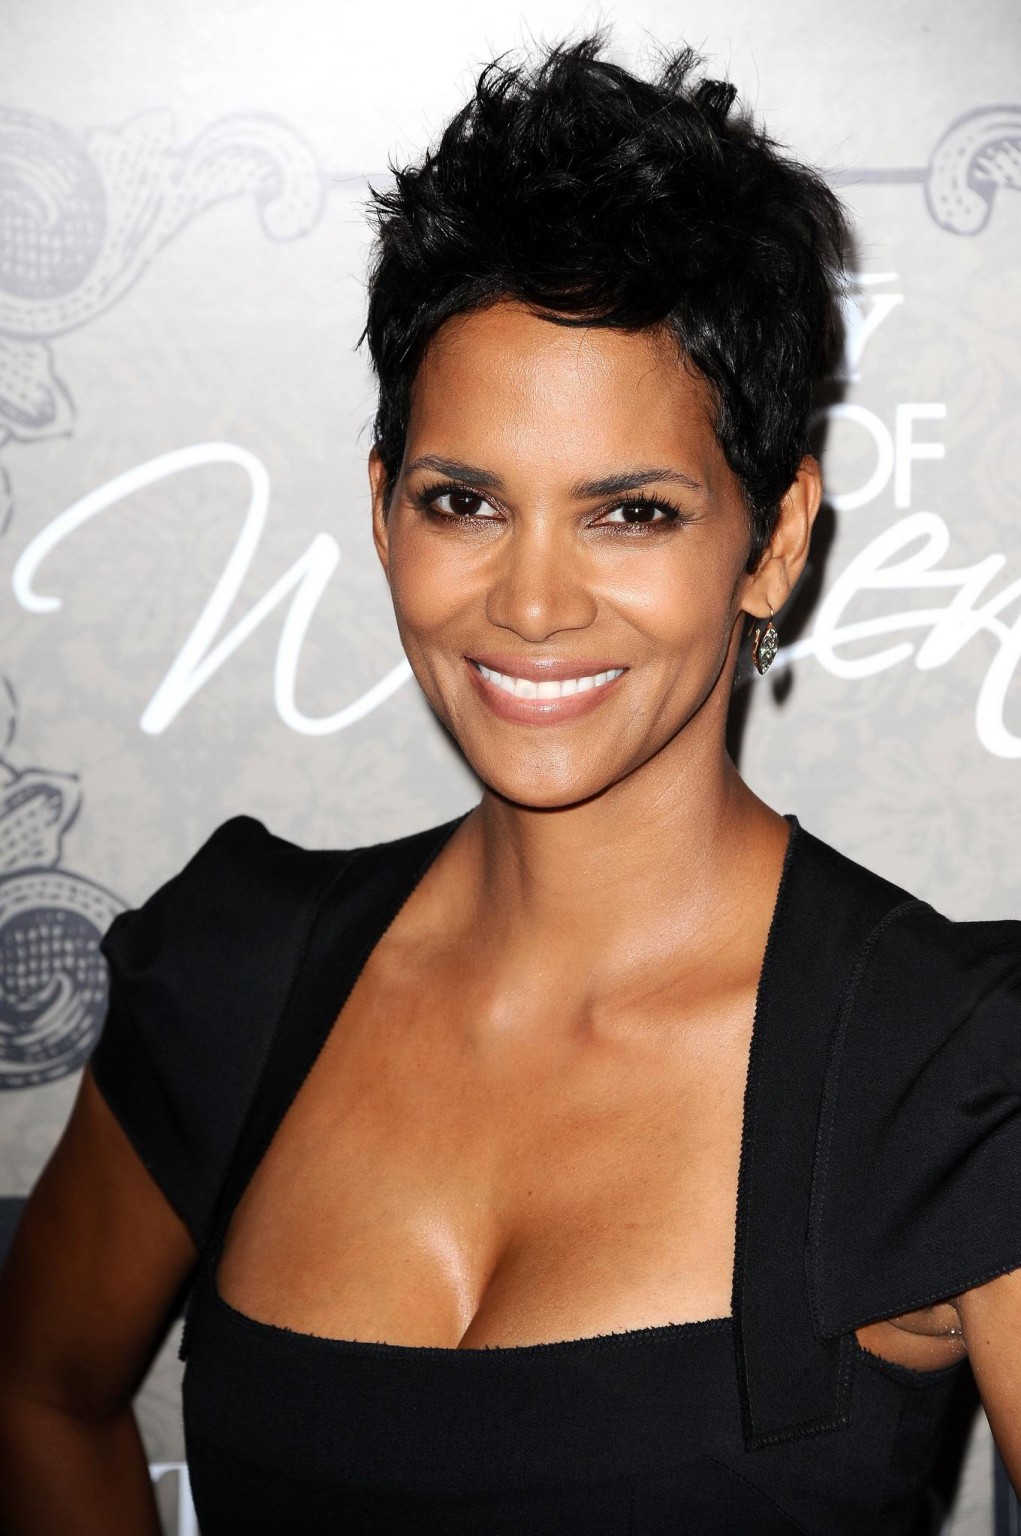 Halle Berry Cleavy Wearing A Black Low Cut Dress At Varietys Power Of Women In Porn Pictures